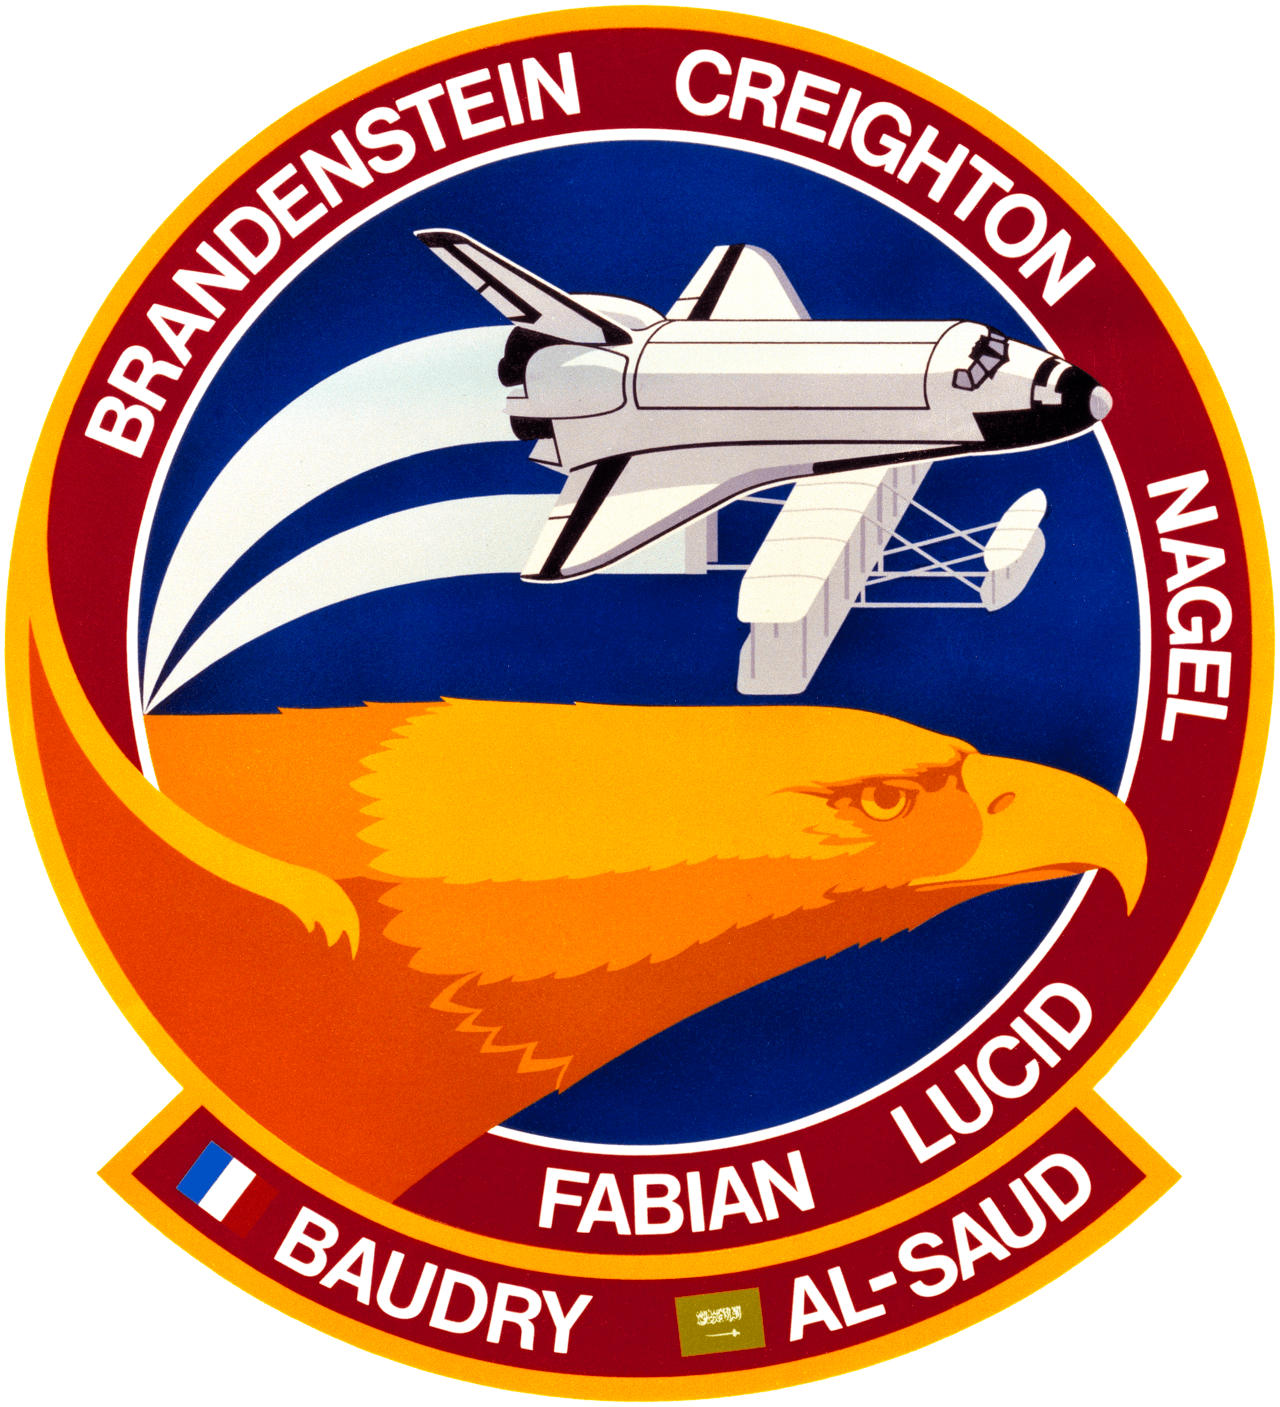 Mission patch for STS-51-G